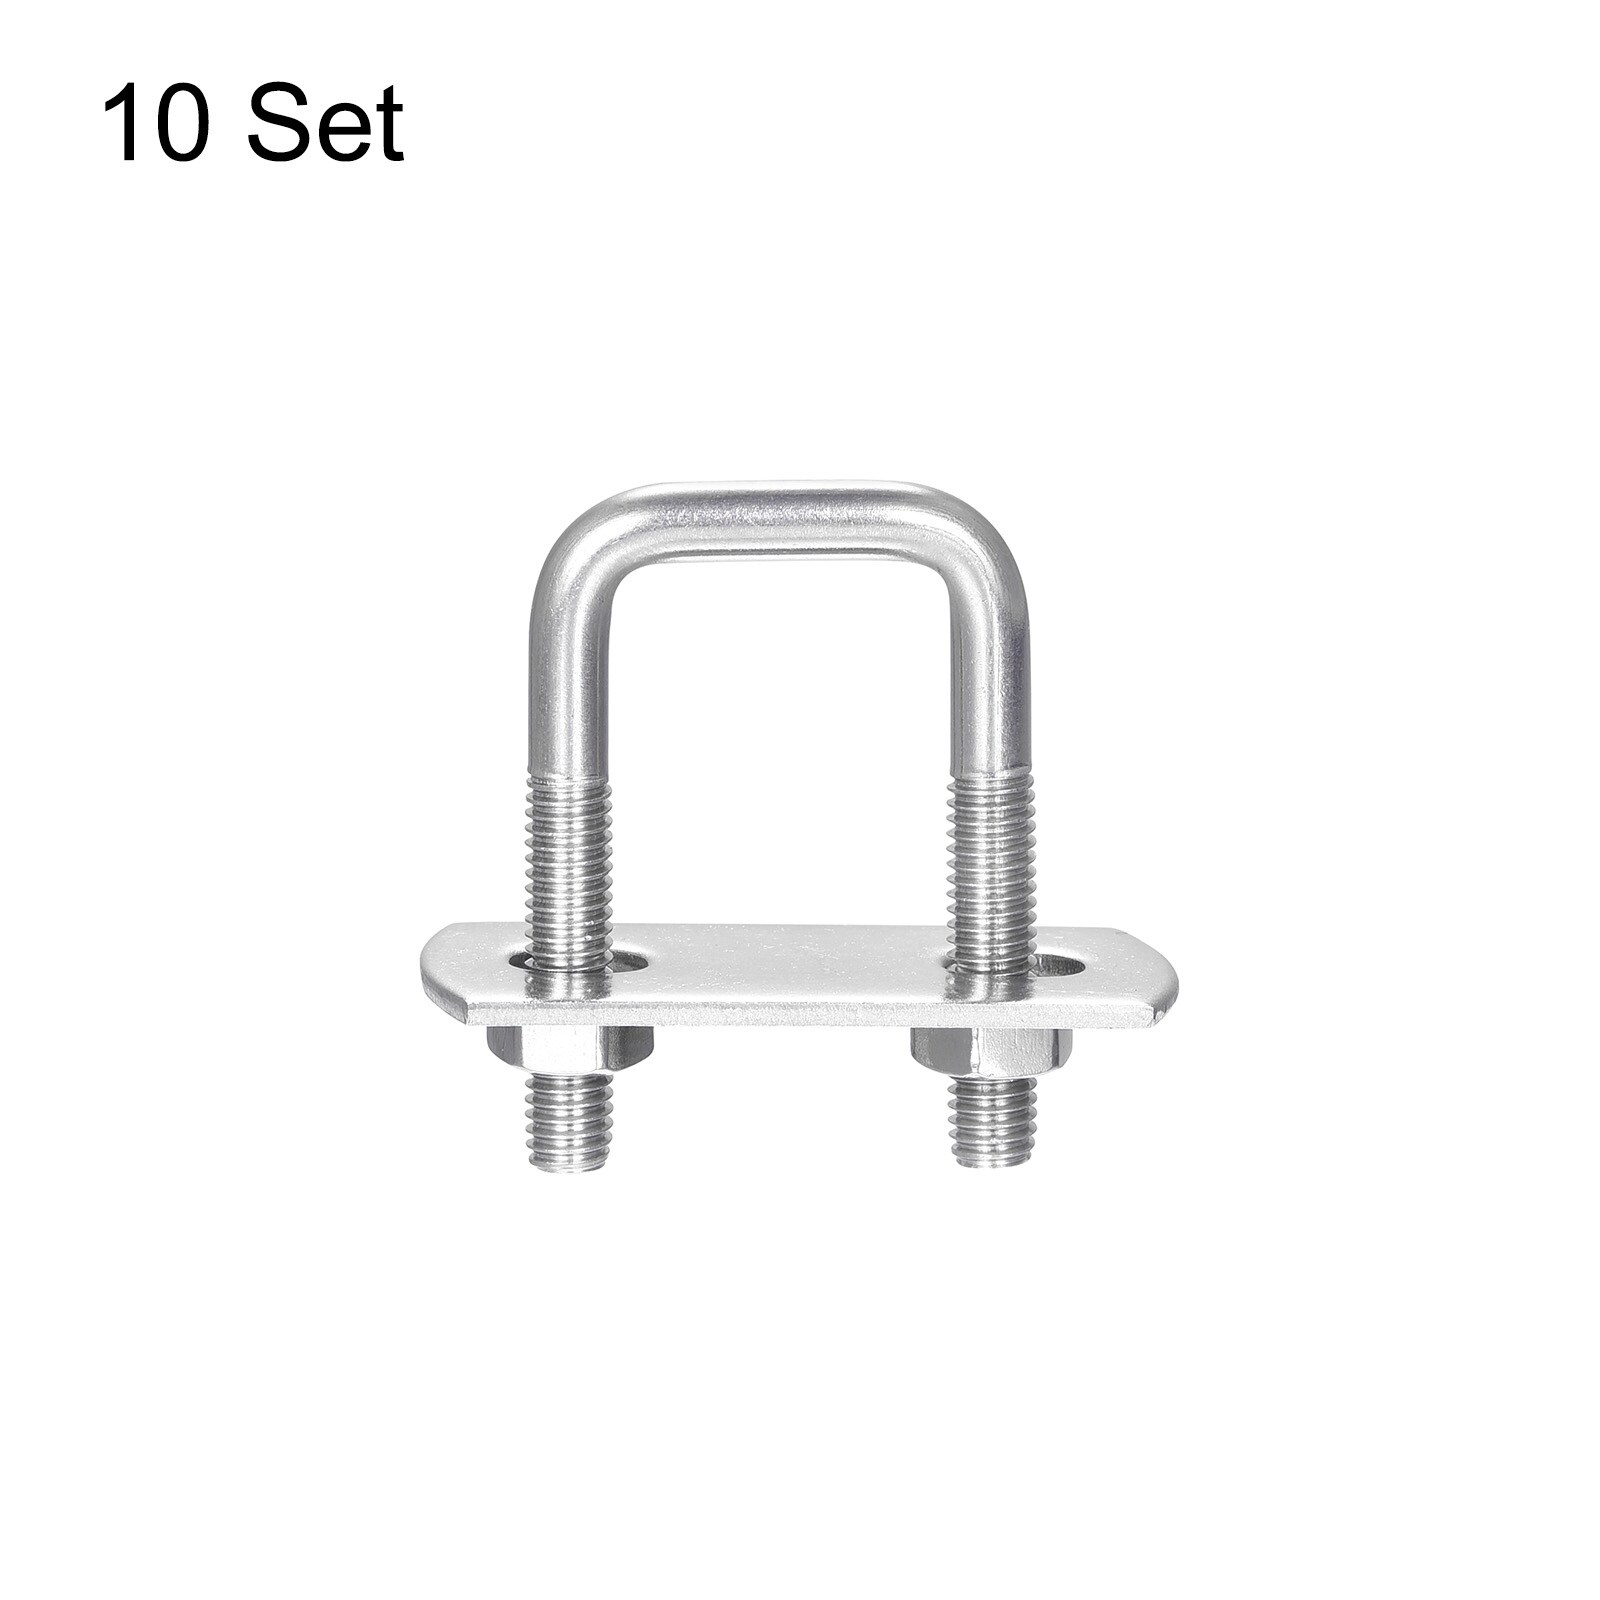 Square U-Bolts, 304 Stainless Steel U Clamp Bolt with Nuts and Plates, for Boat  Trailer Bed Bath  Beyond 36629669